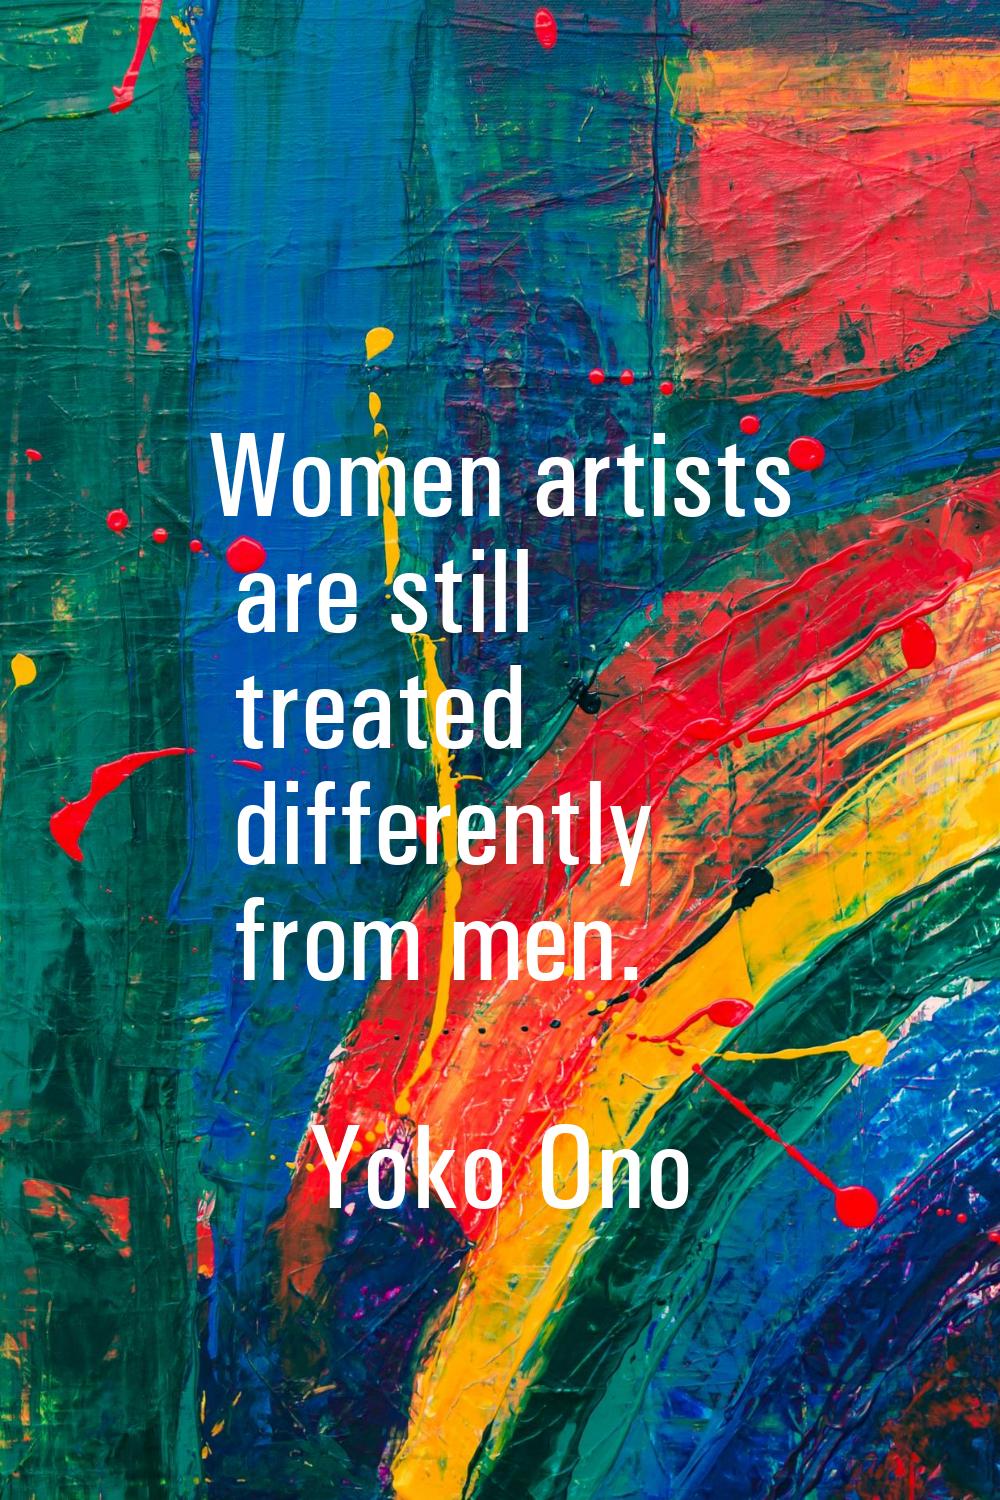 Women artists are still treated differently from men.